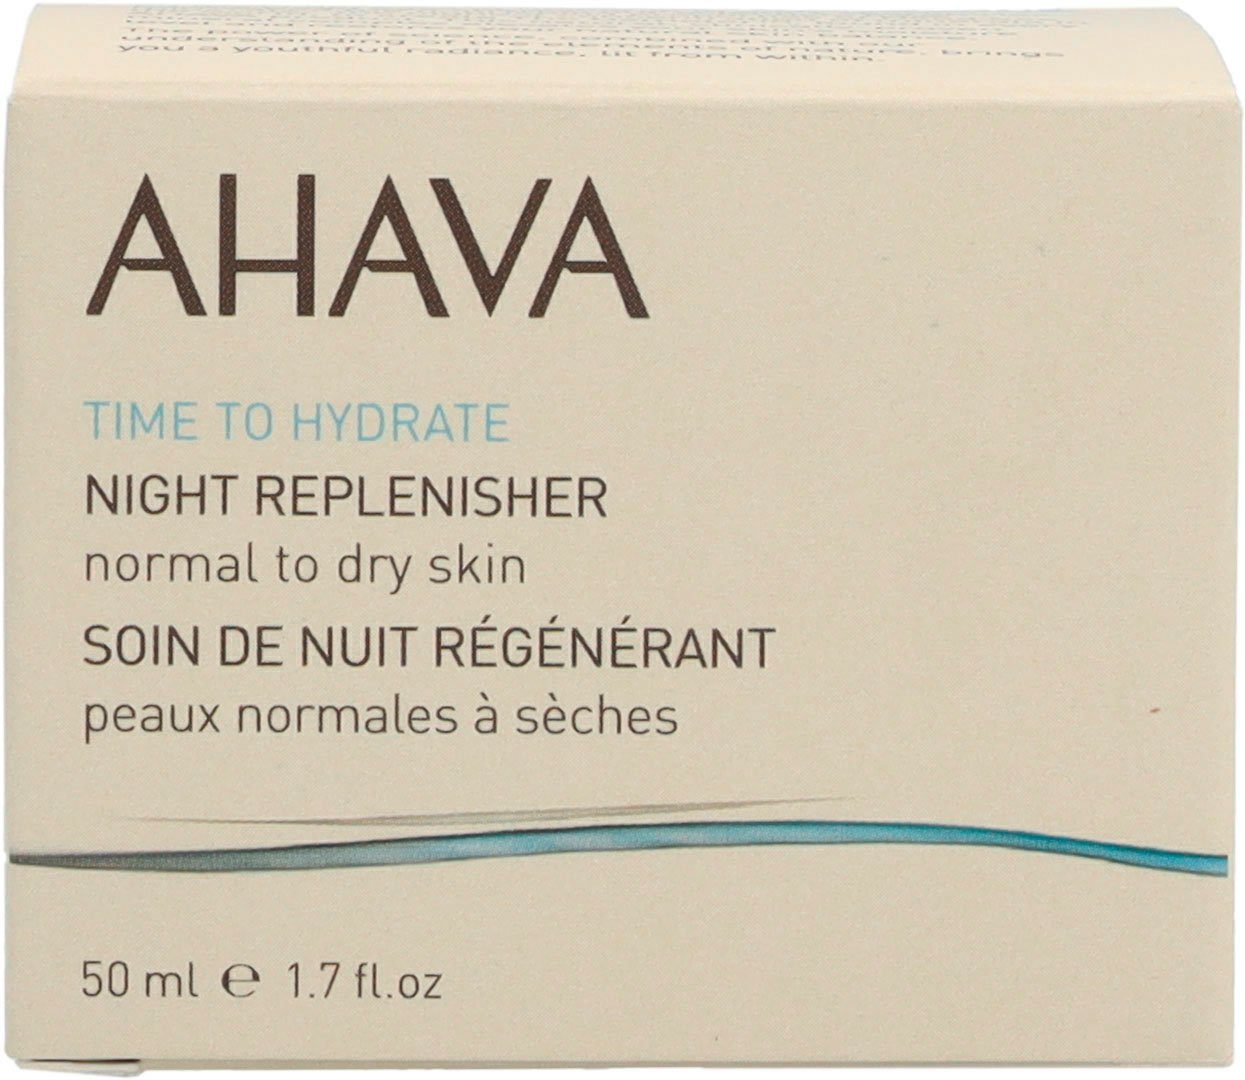 Dry AHAVA Normal Night To Replenisher Time Hydrate Nachtcreme